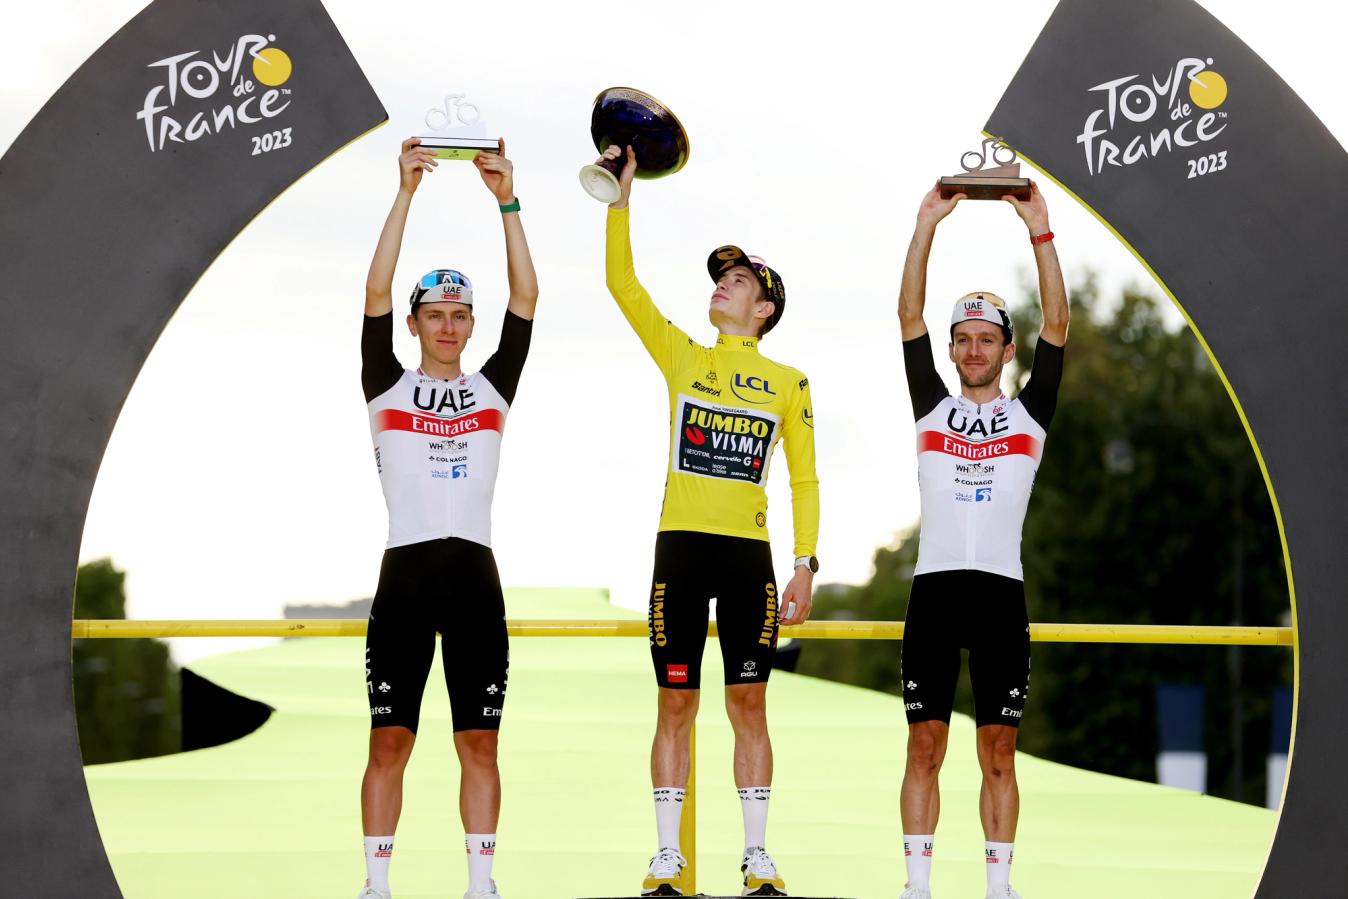 While UAE had two riders on the podium at the 2023 Tour de France, the step they wanted alluded them 